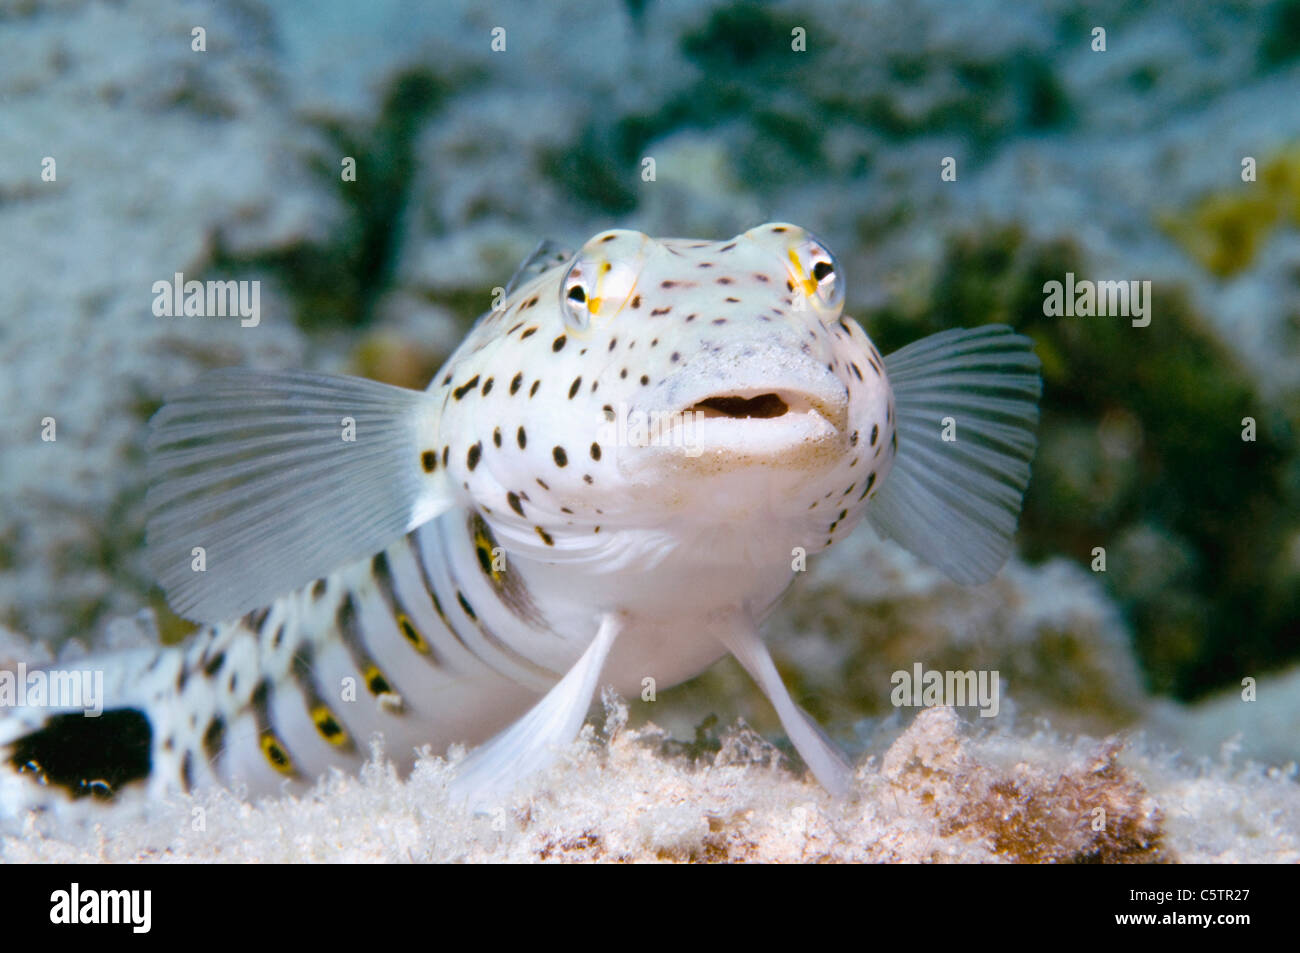 Egypt, Red Sea, Speckled sandperch (Parapercis hexophthalma), close-up Stock Photo